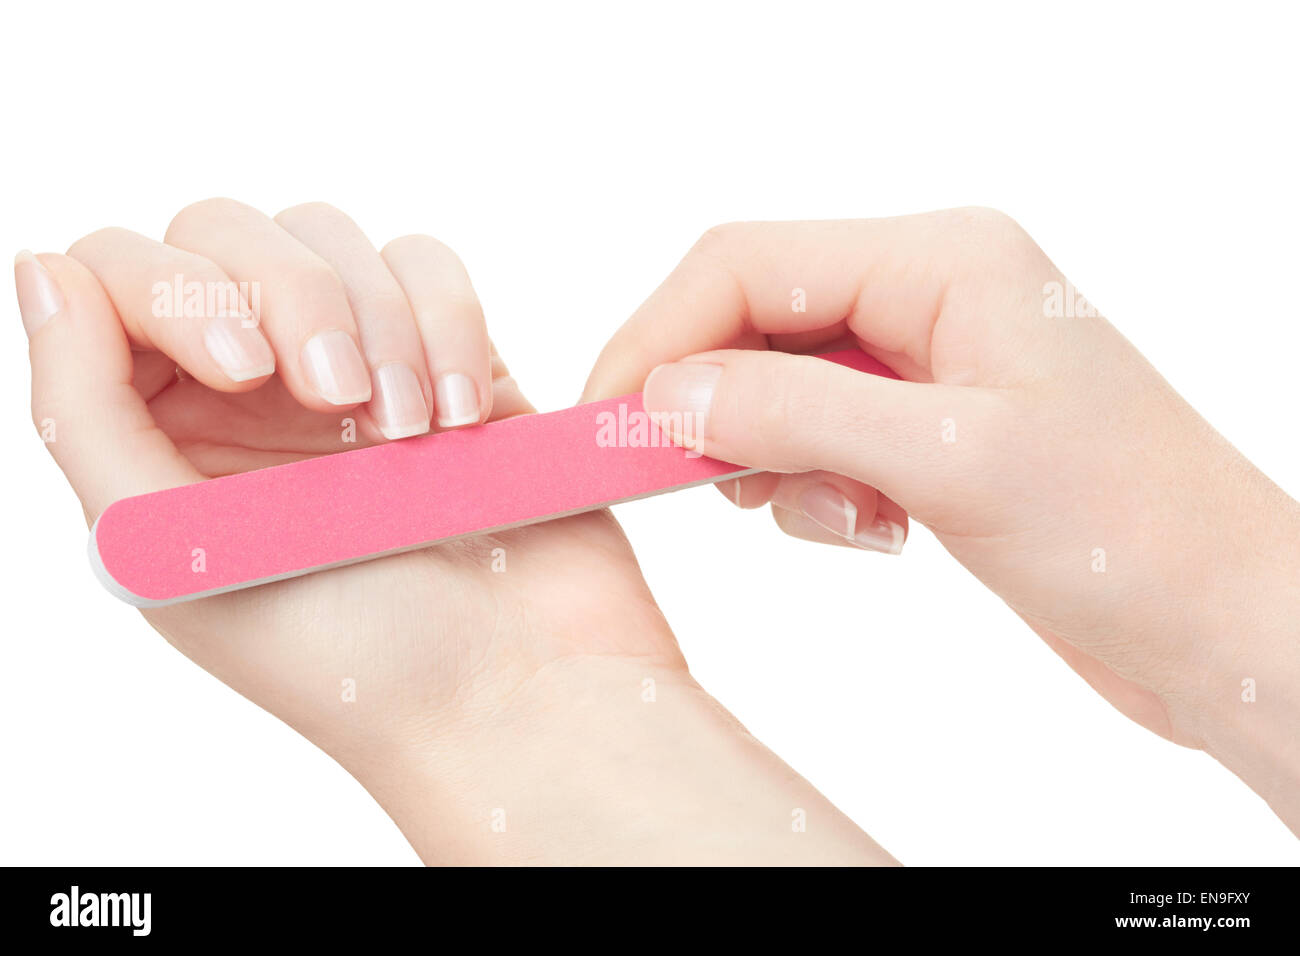 Woman hands manicure with nail file Stock Photo